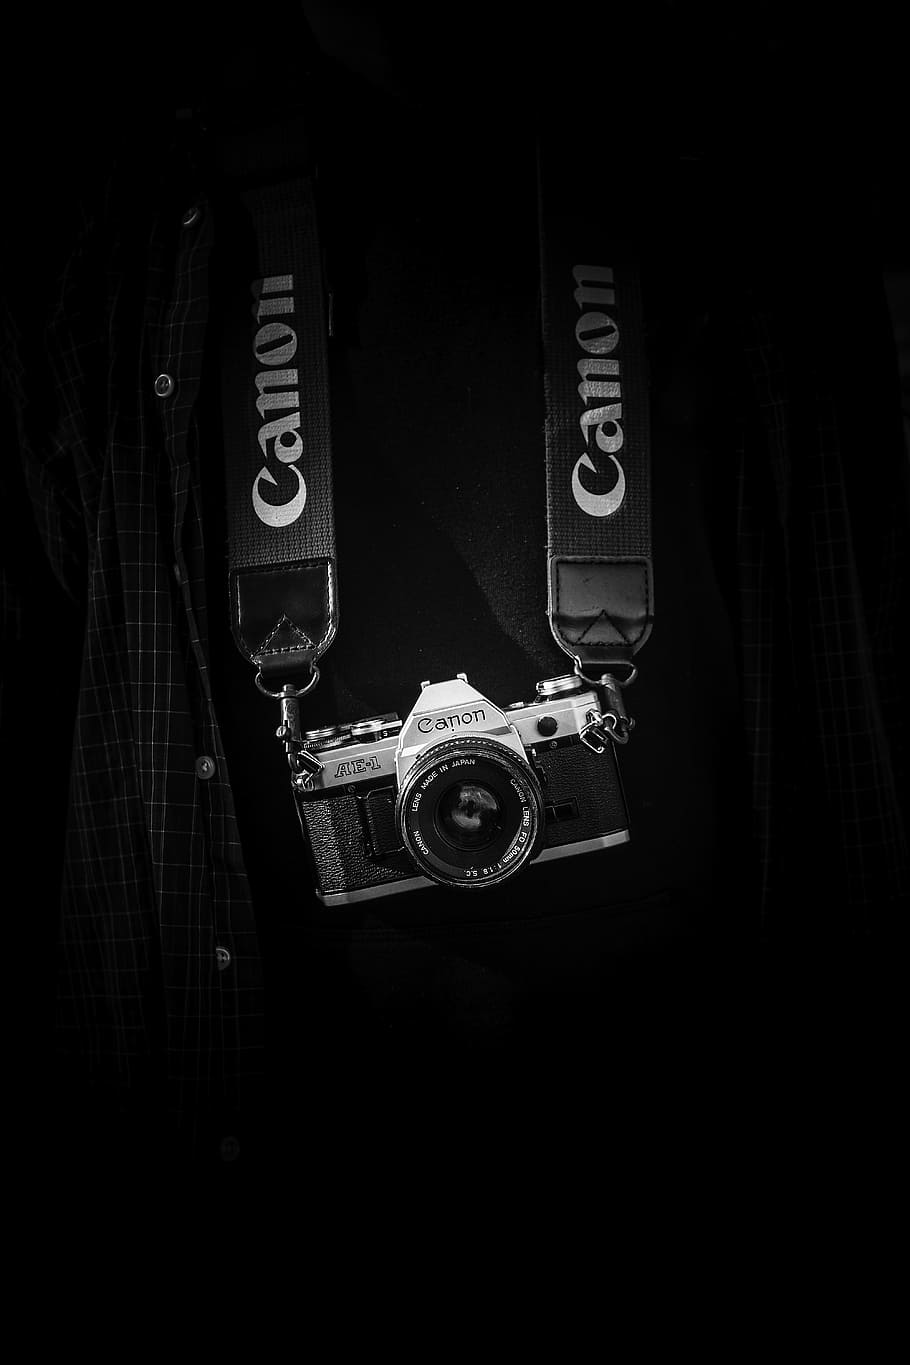 gray and black Canon camera body with lanyard, gray and black Canon camera